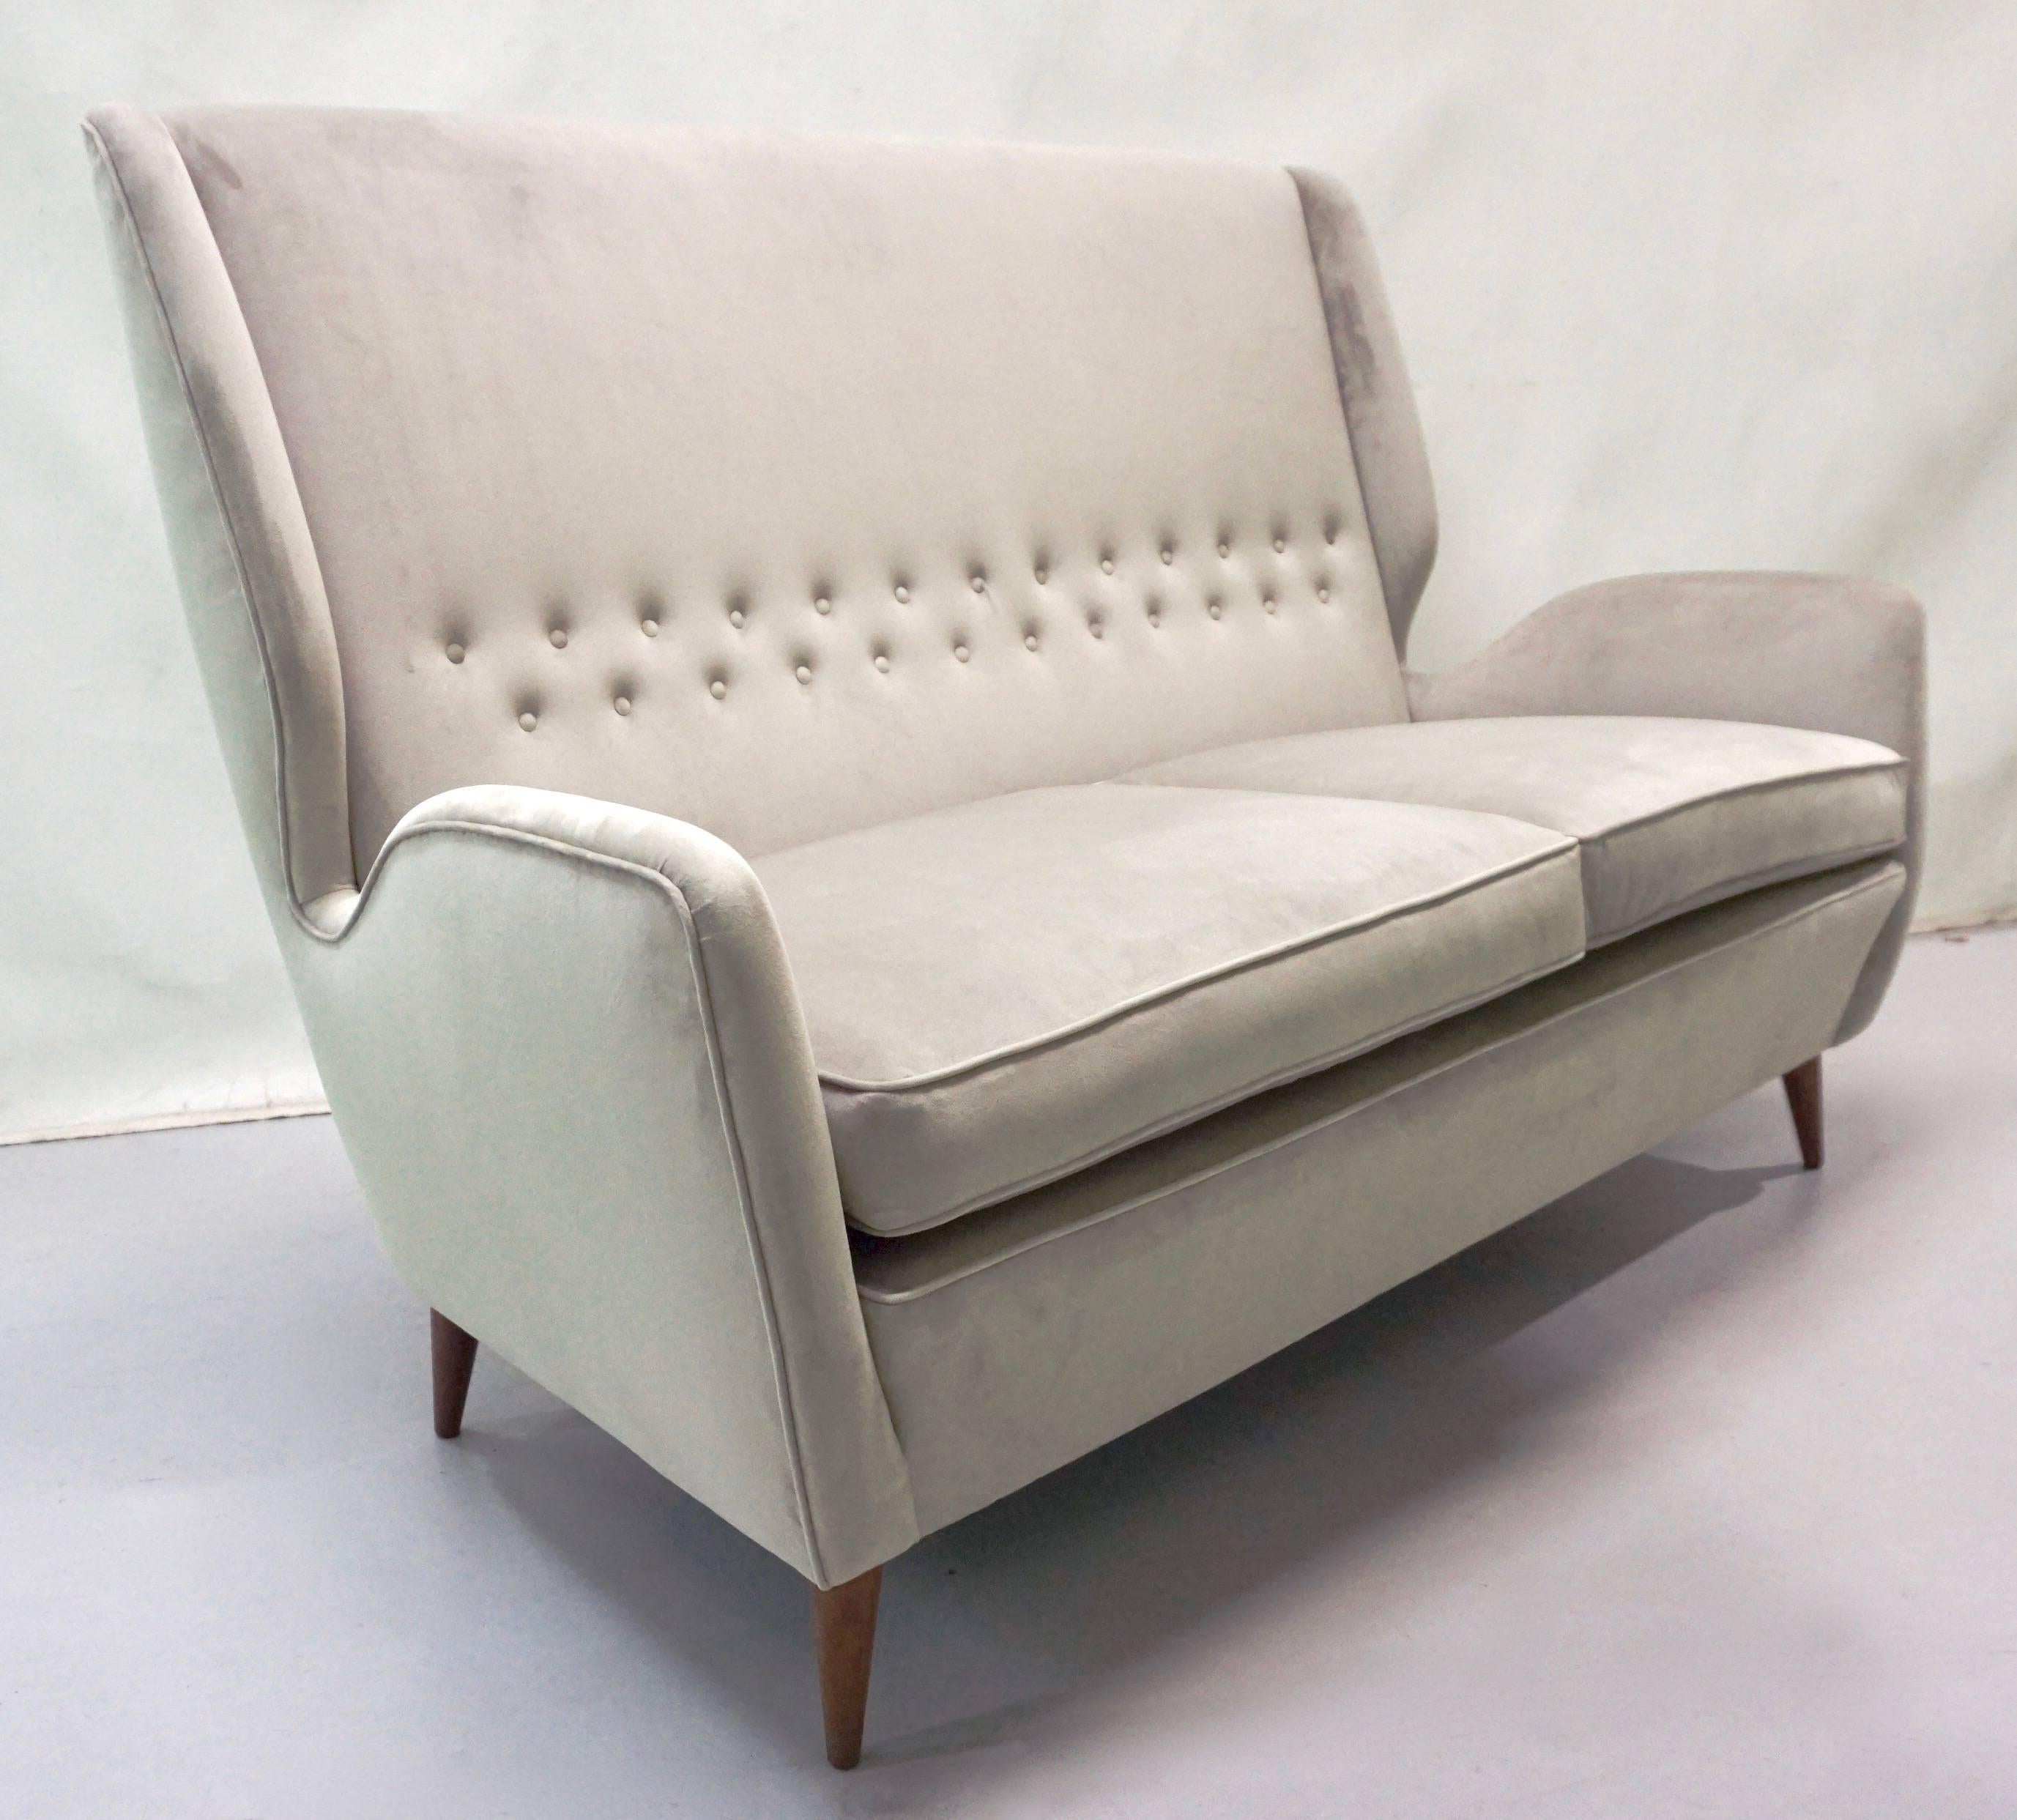 This comfortable settee by Gio Ponti, a statement of elegance and modern Italian design, has very clean cut aerodynamic lines with very chic indented sides and slightly folded button-tufted back, raised on walnut legs. It is upholstered in light